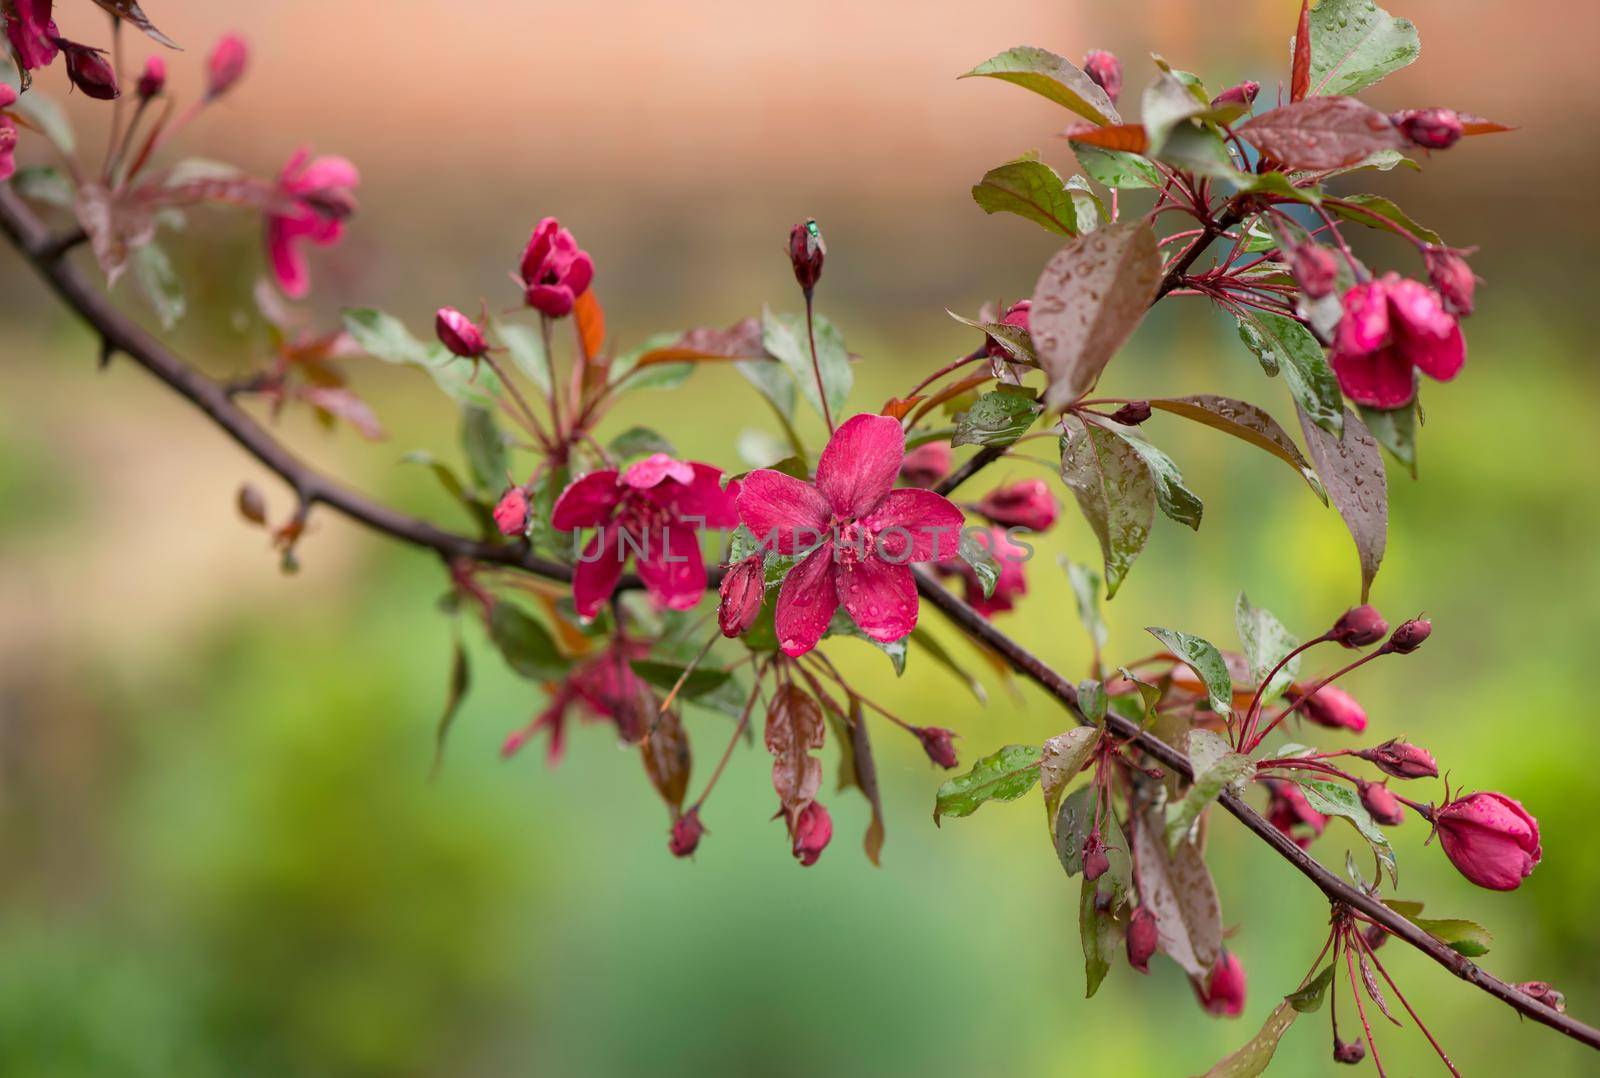 Blooming paradise apple tree buds in the garden by aprilphoto